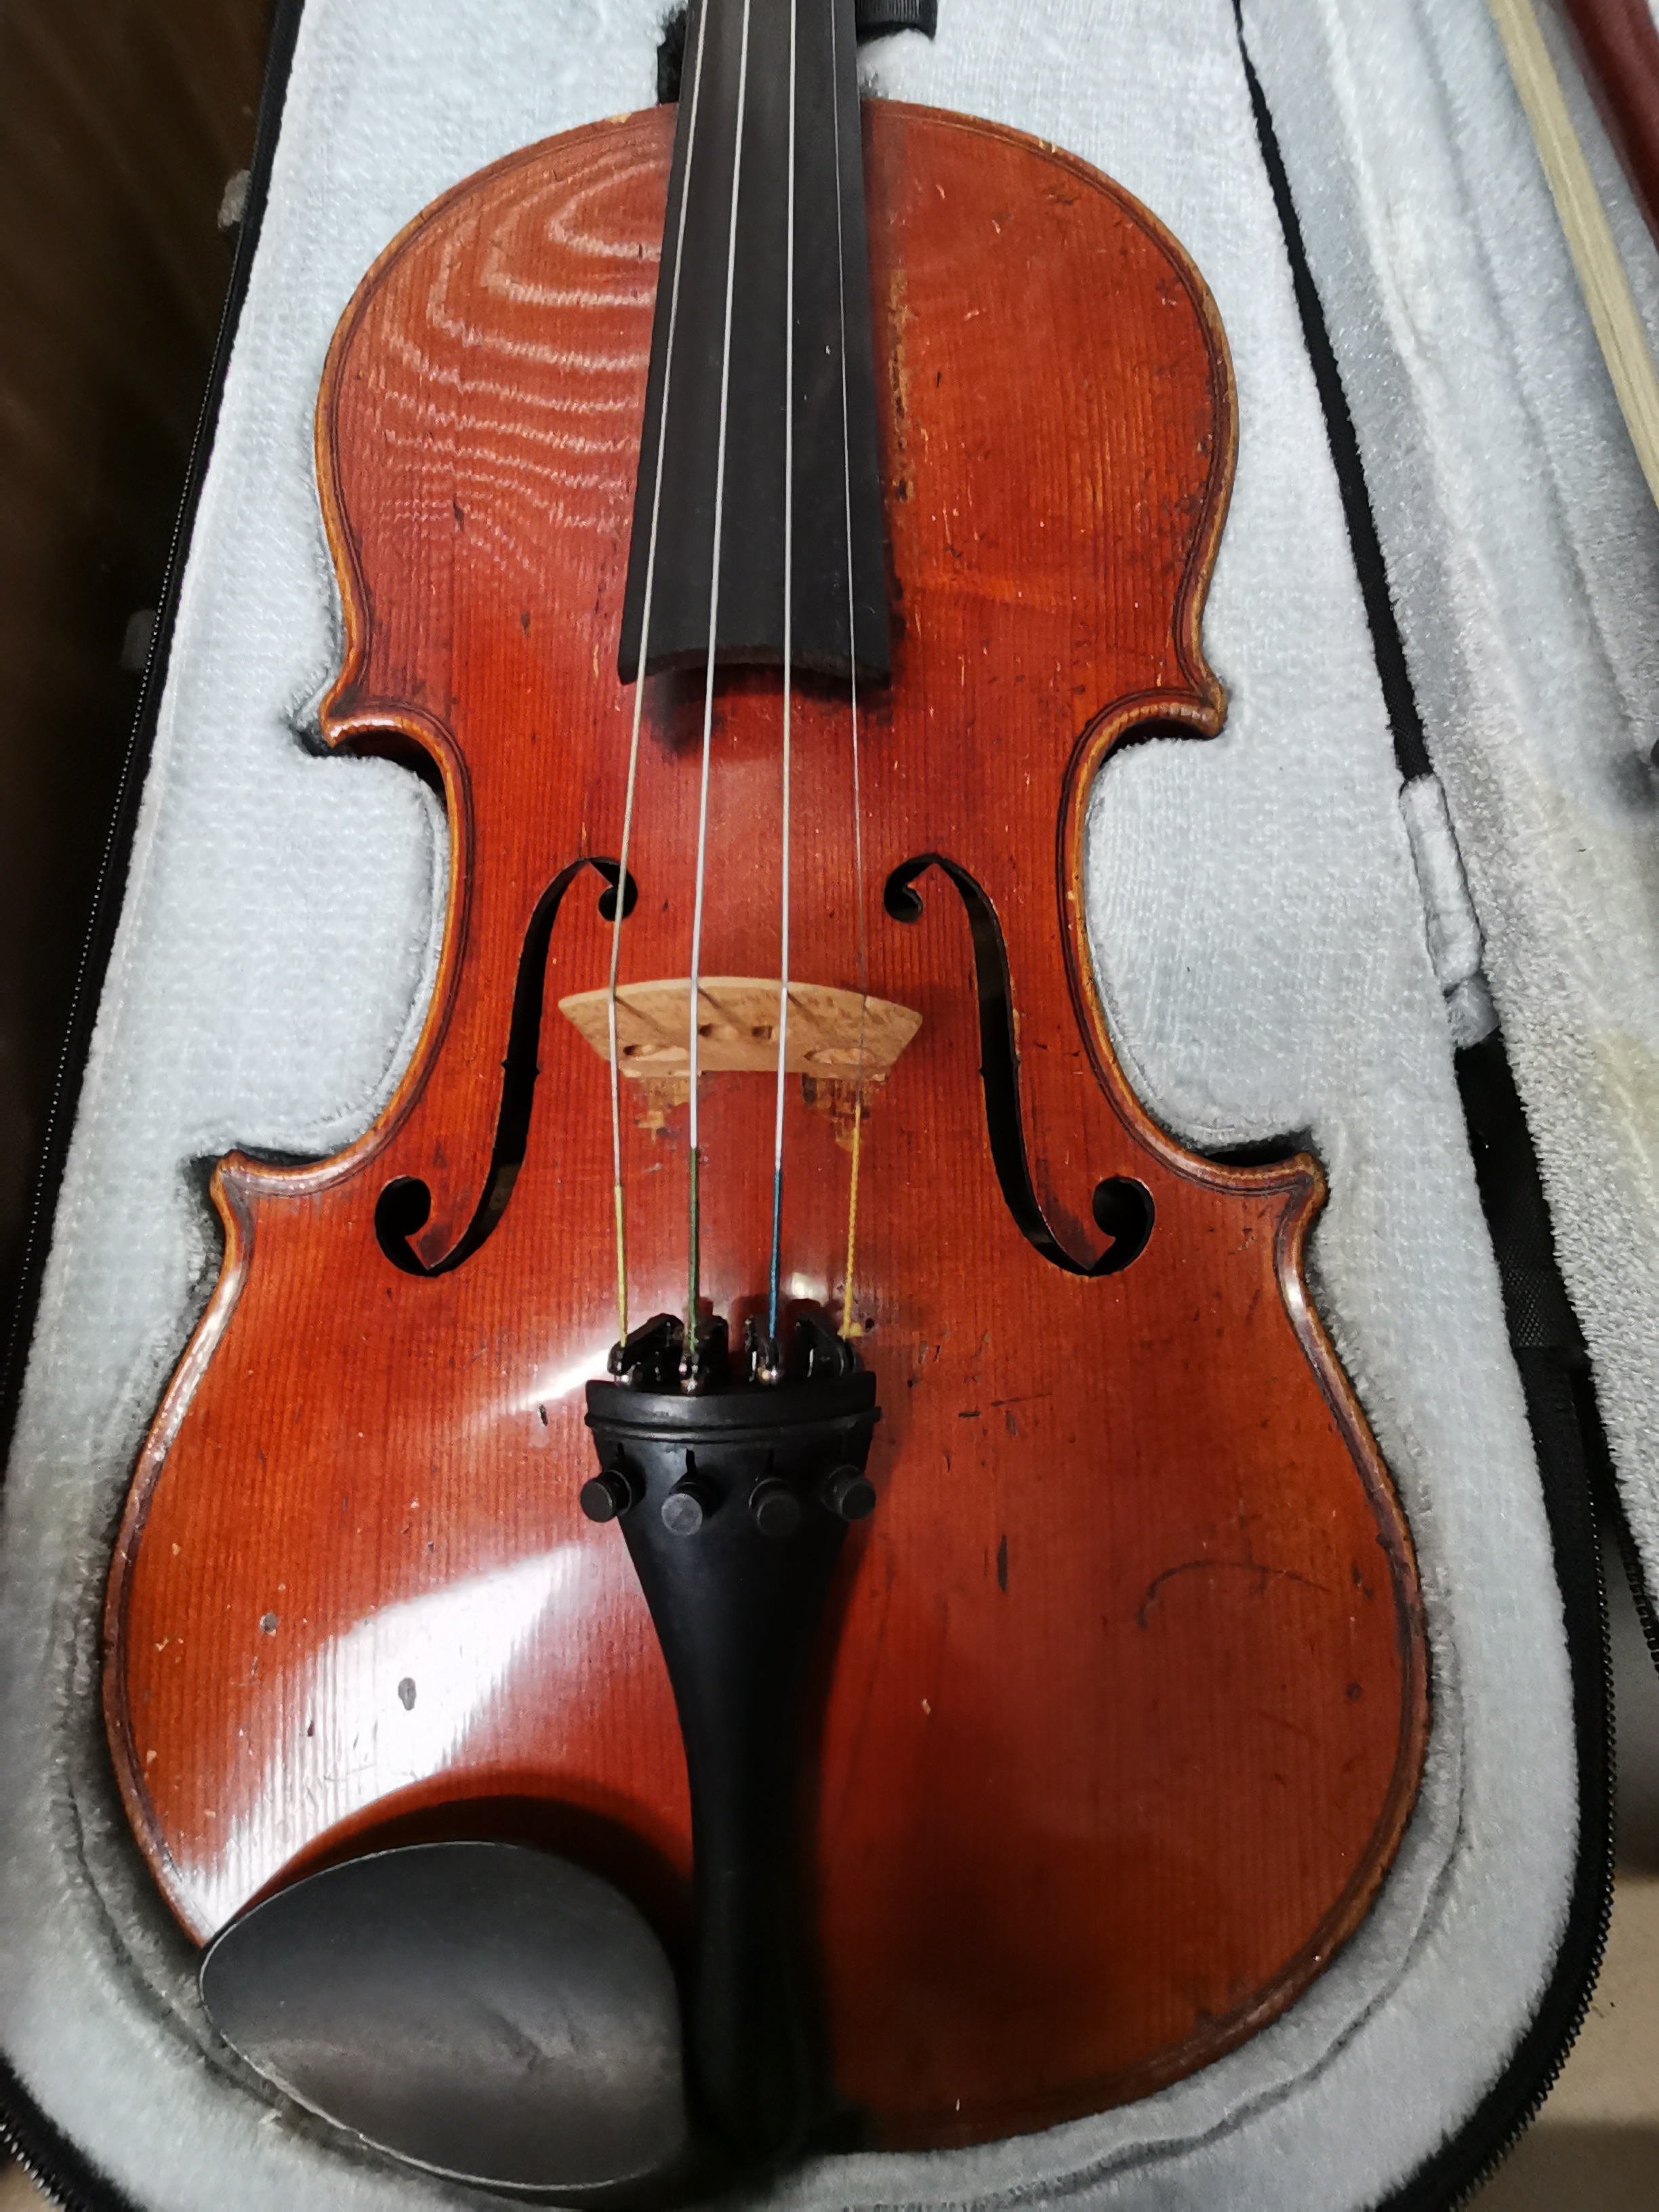 Violin and Bow In Case - Image 5 of 10